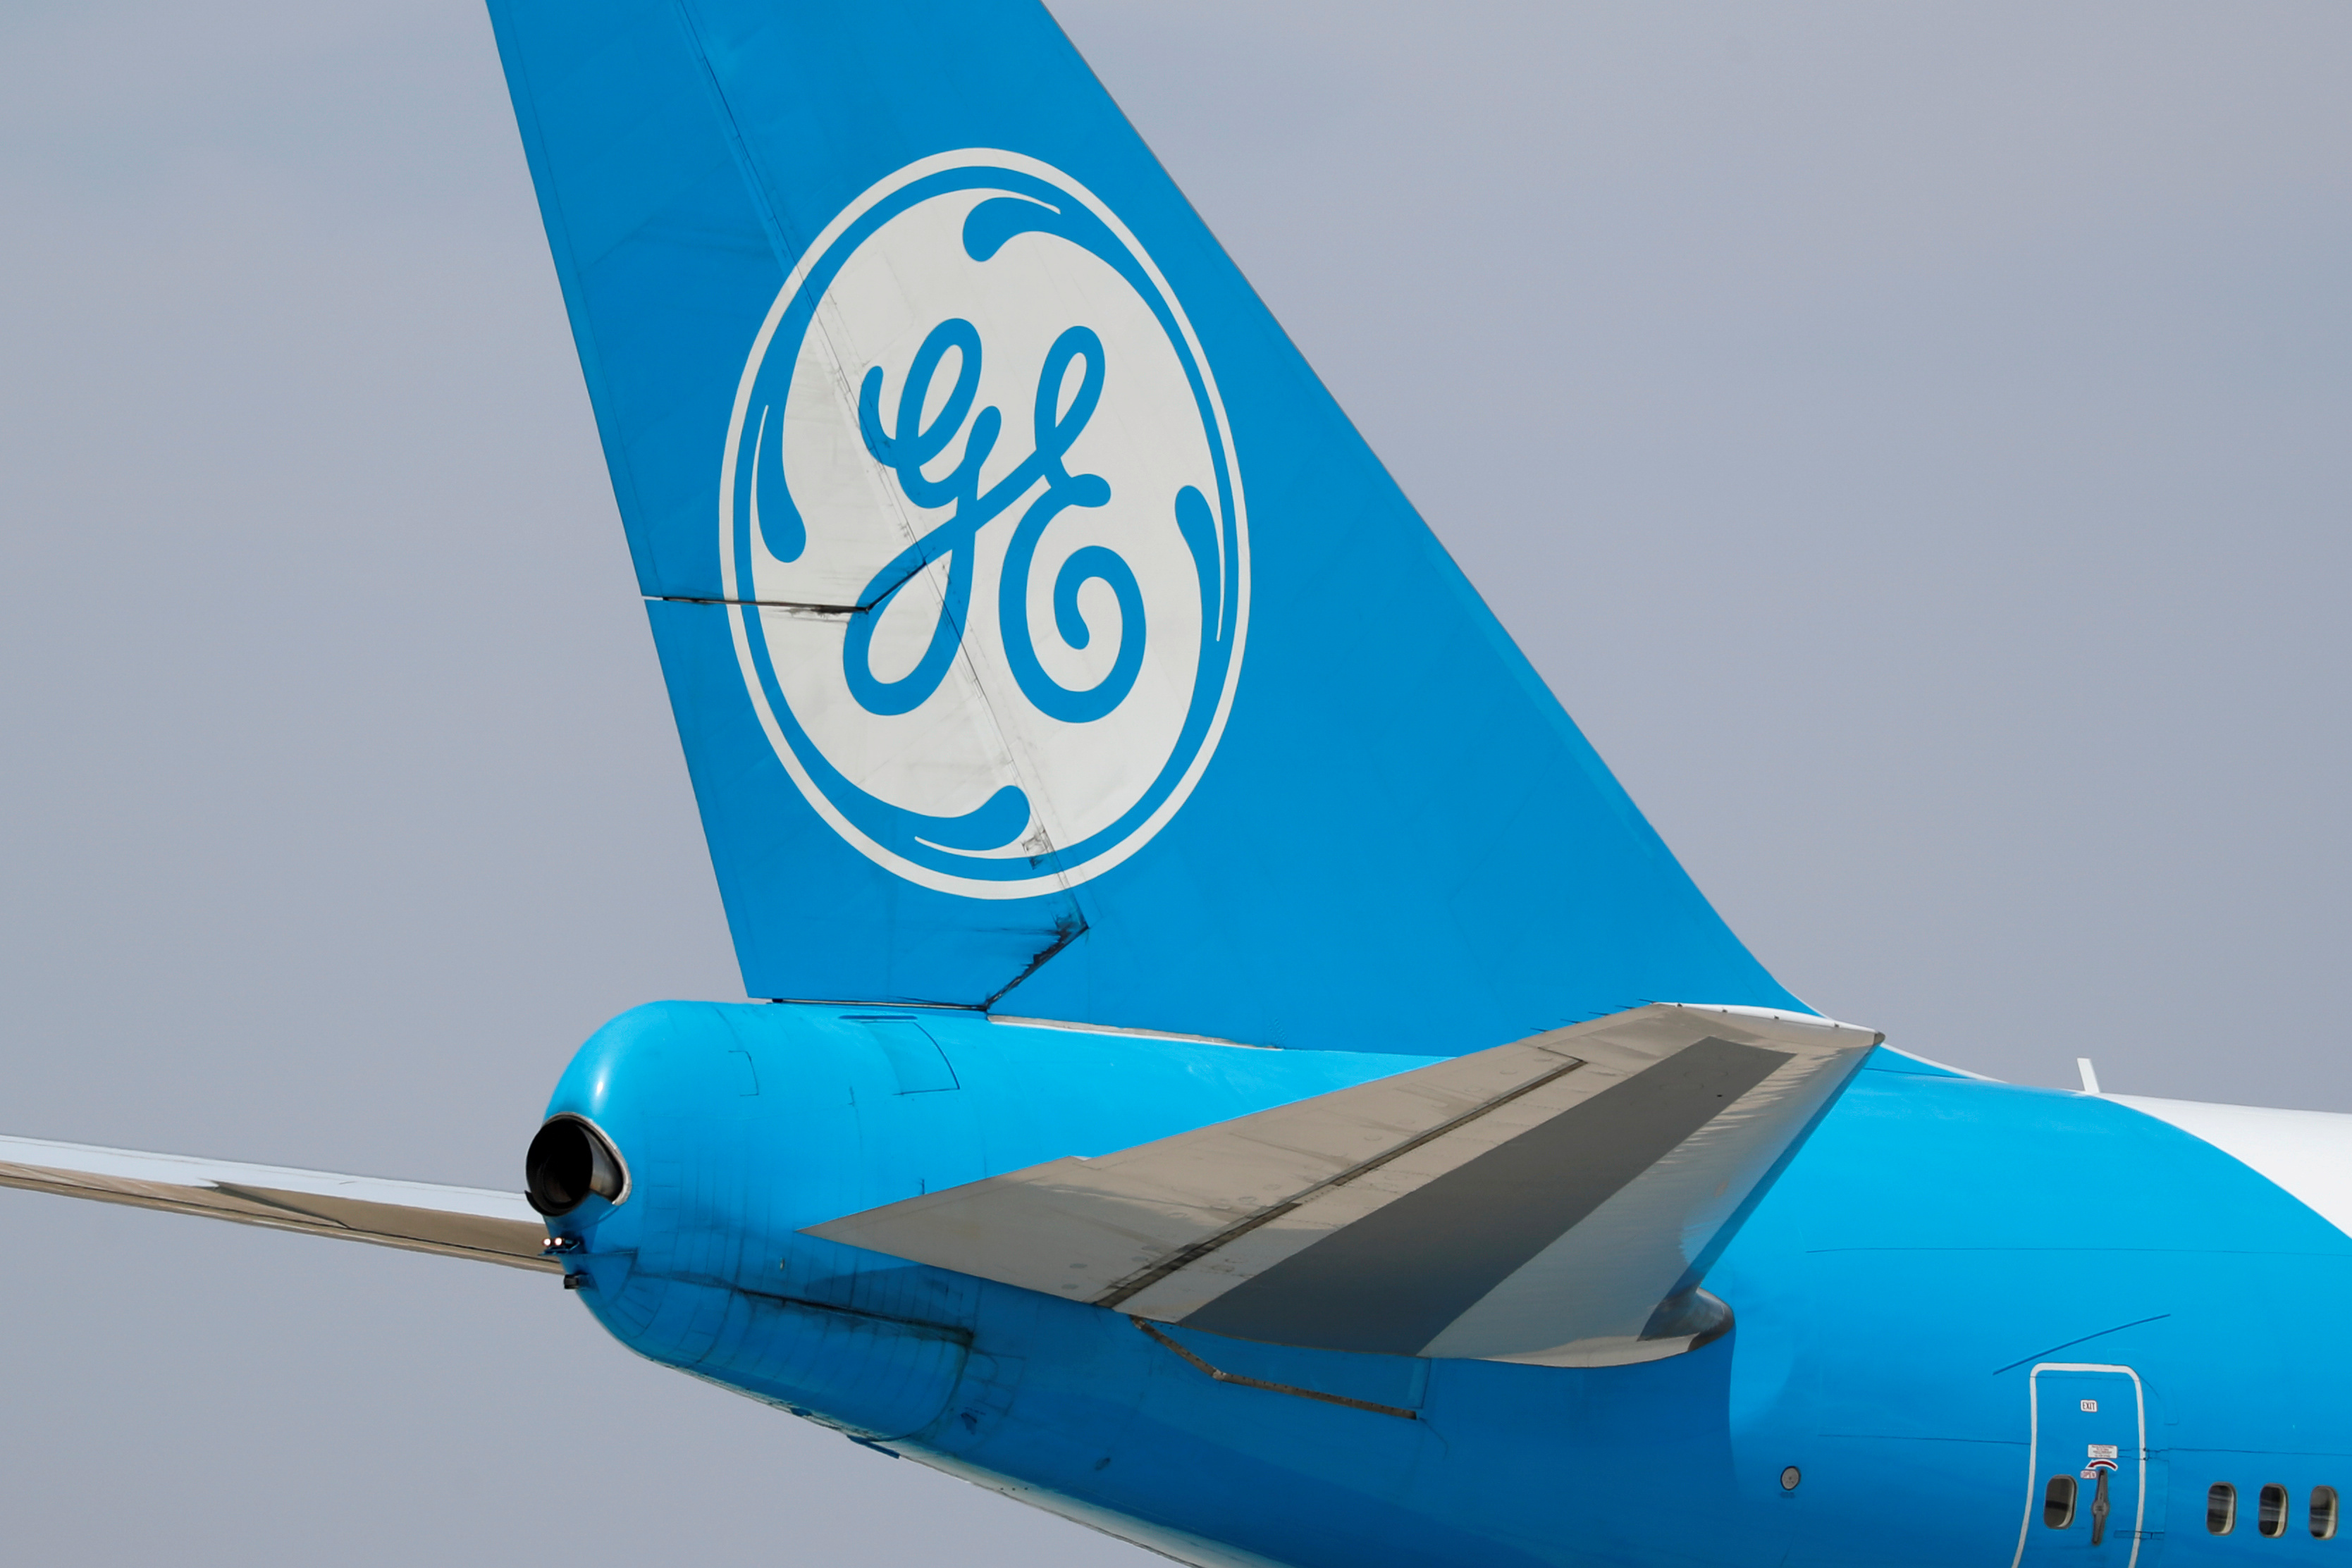 A General Electric  aircraft used for testing  jet engines is shown at Victorville Airport in Victorville, California